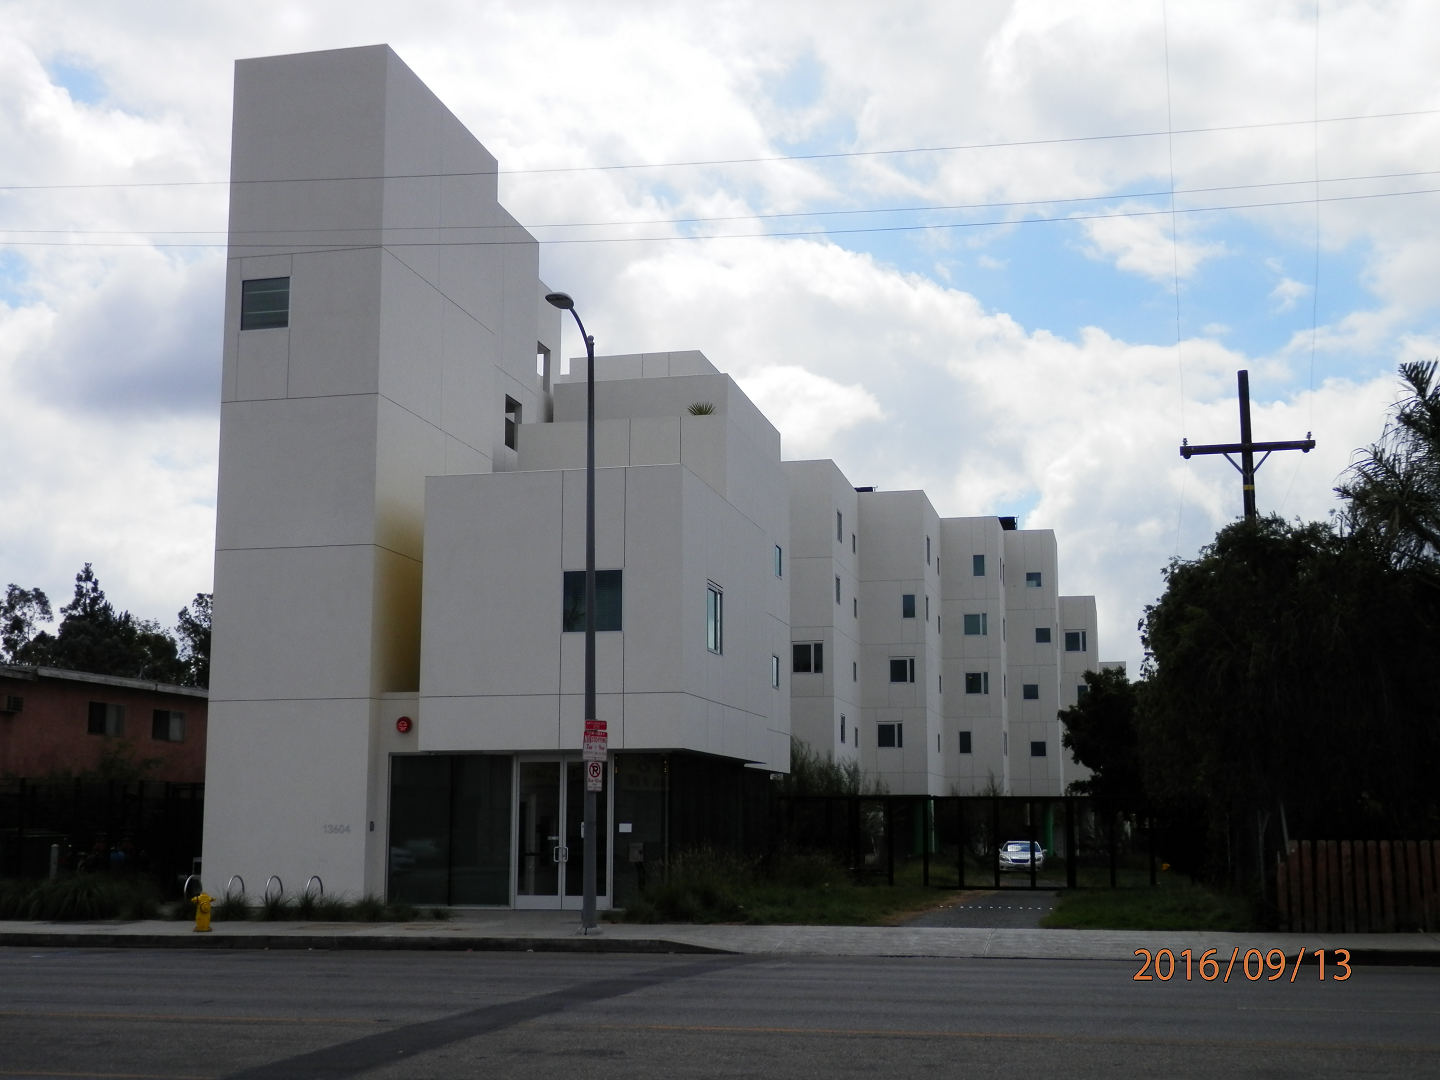 Street view of four story building with parking on premises and front entrance,